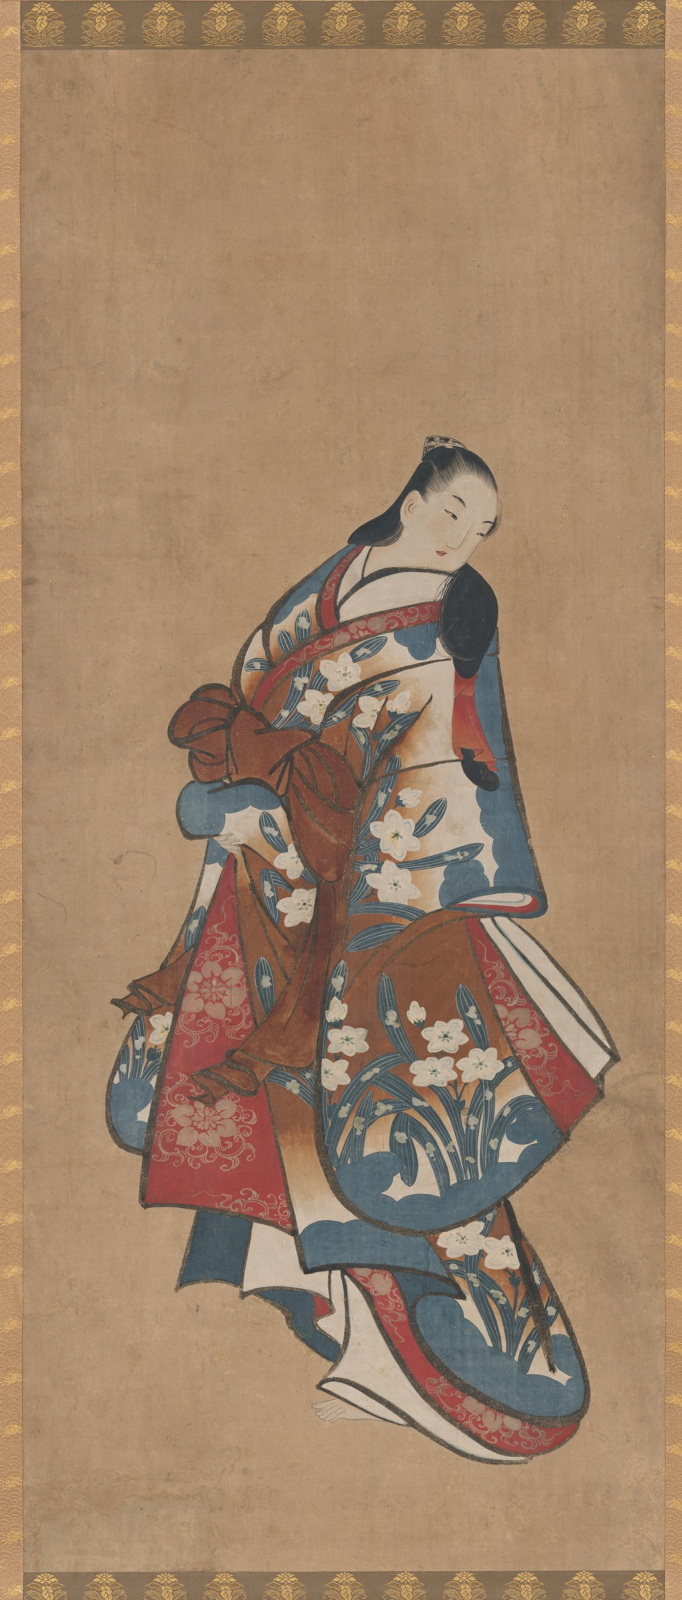 Edo Painting: Japanese Art from the Feinberg Collection | Arthive